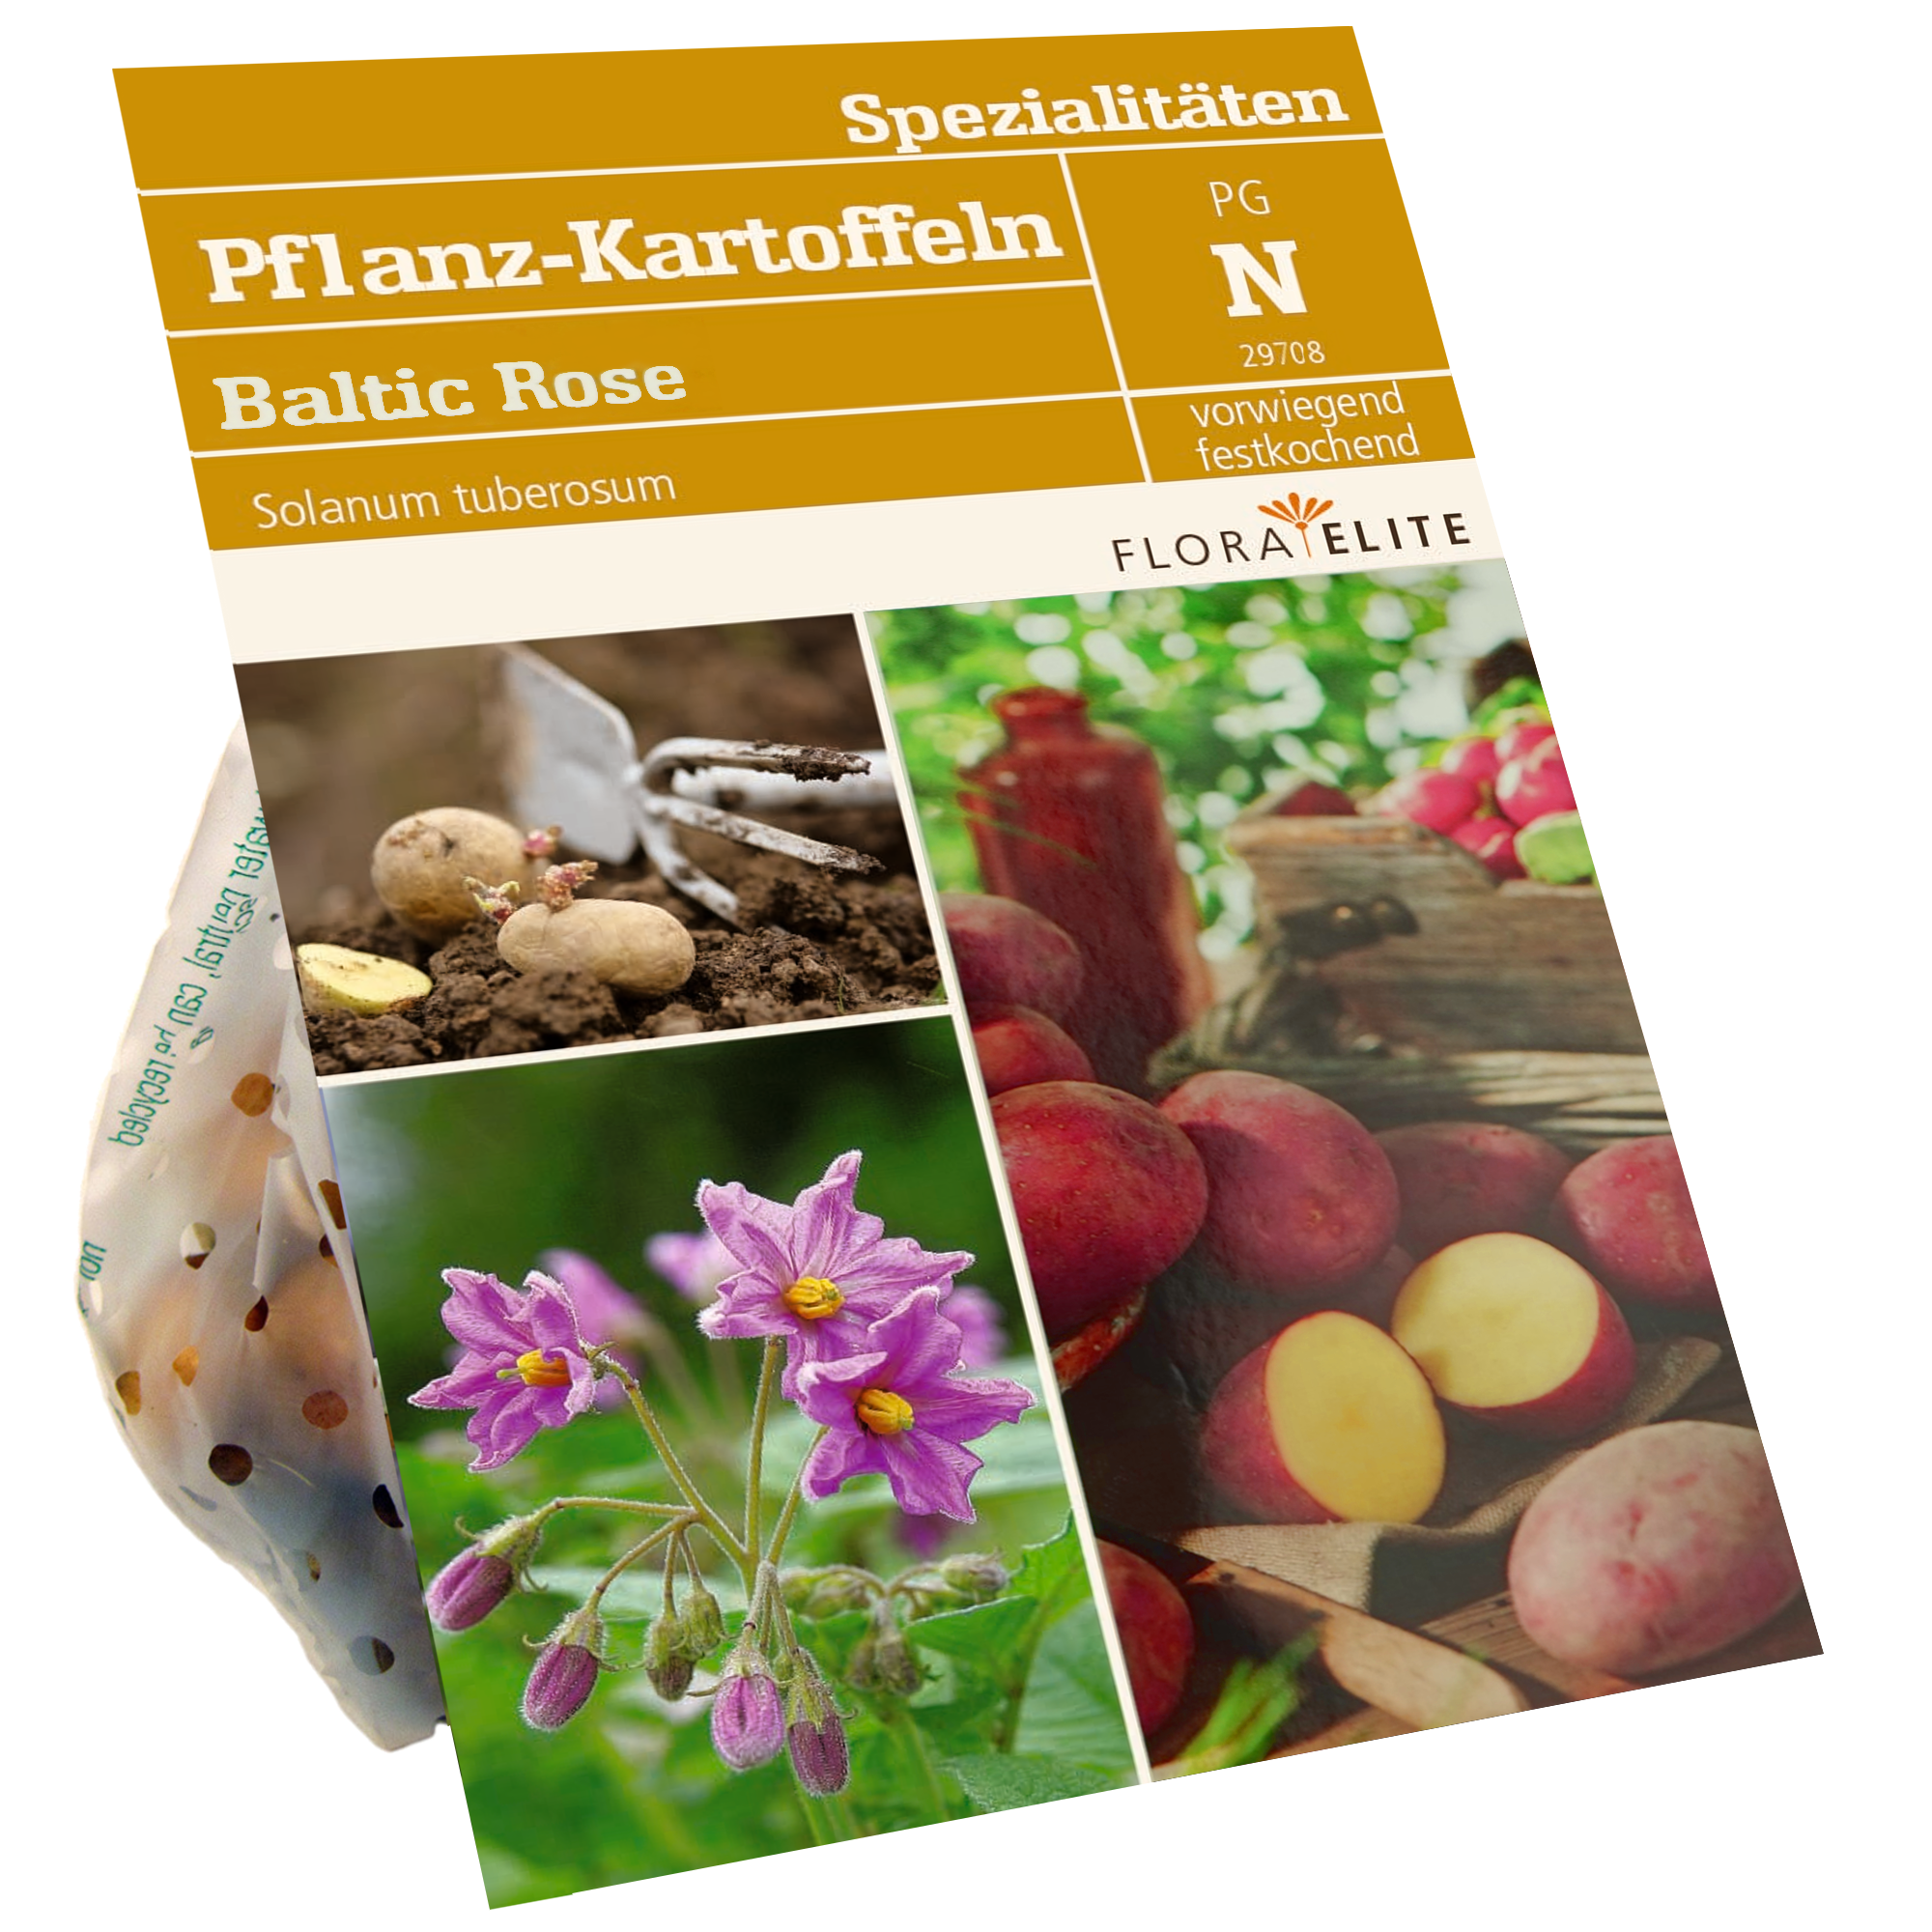 Pflanzkartoffeln 'Baltic Rose' 500 g + product picture